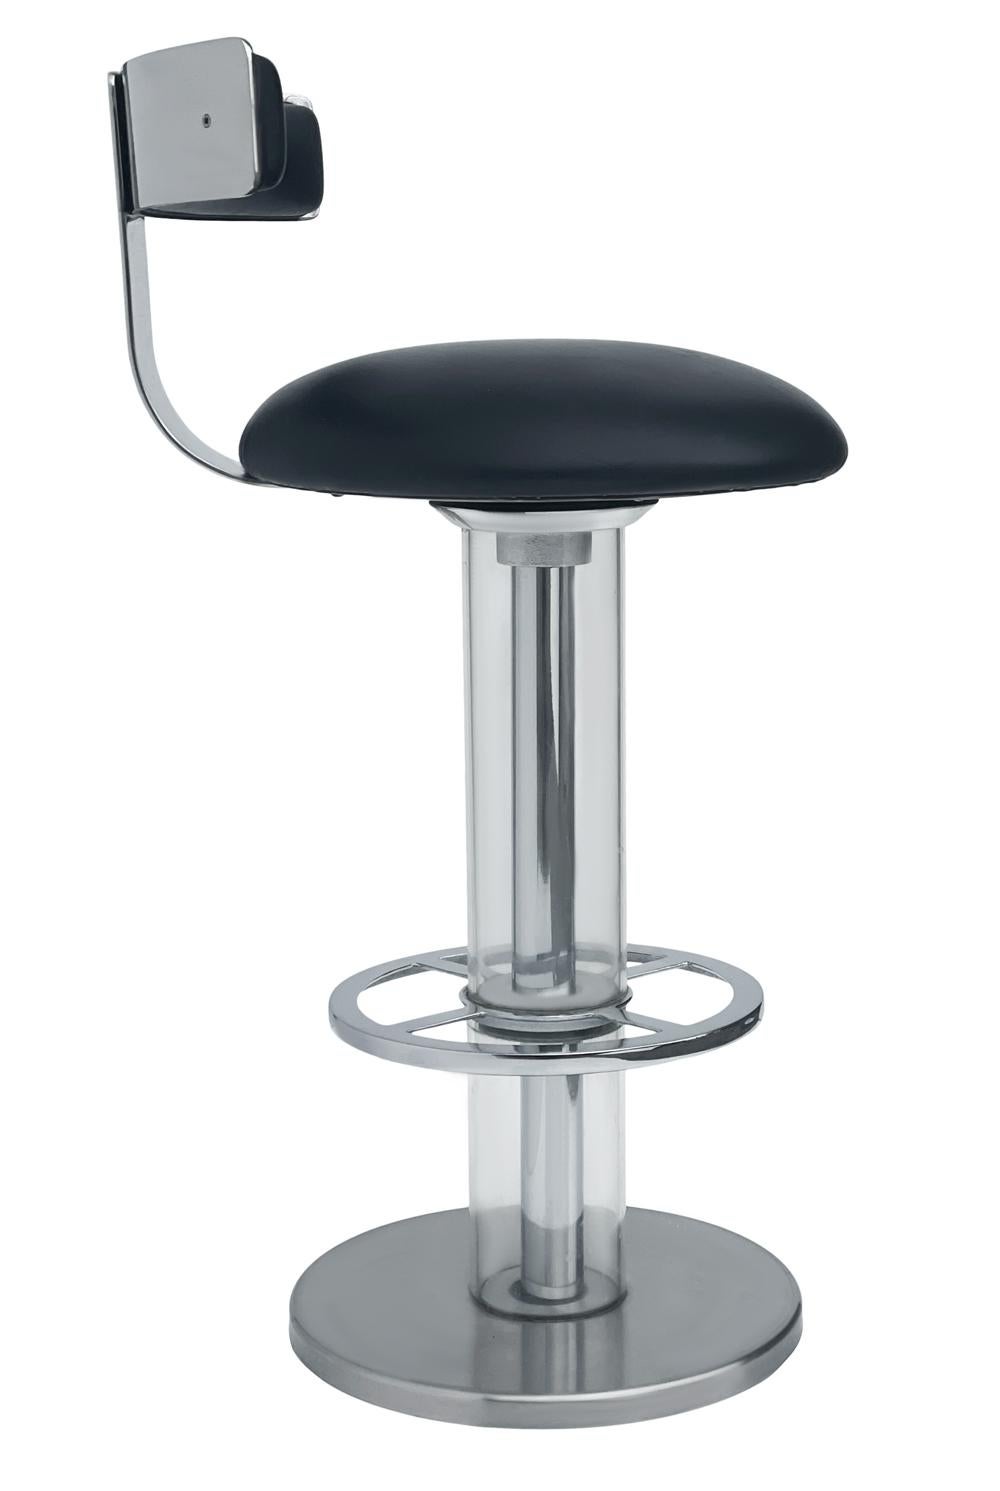 Post-Modern Pair of Mid-Century Modern Bar Stools in Chrome & Black by Design For Leisure